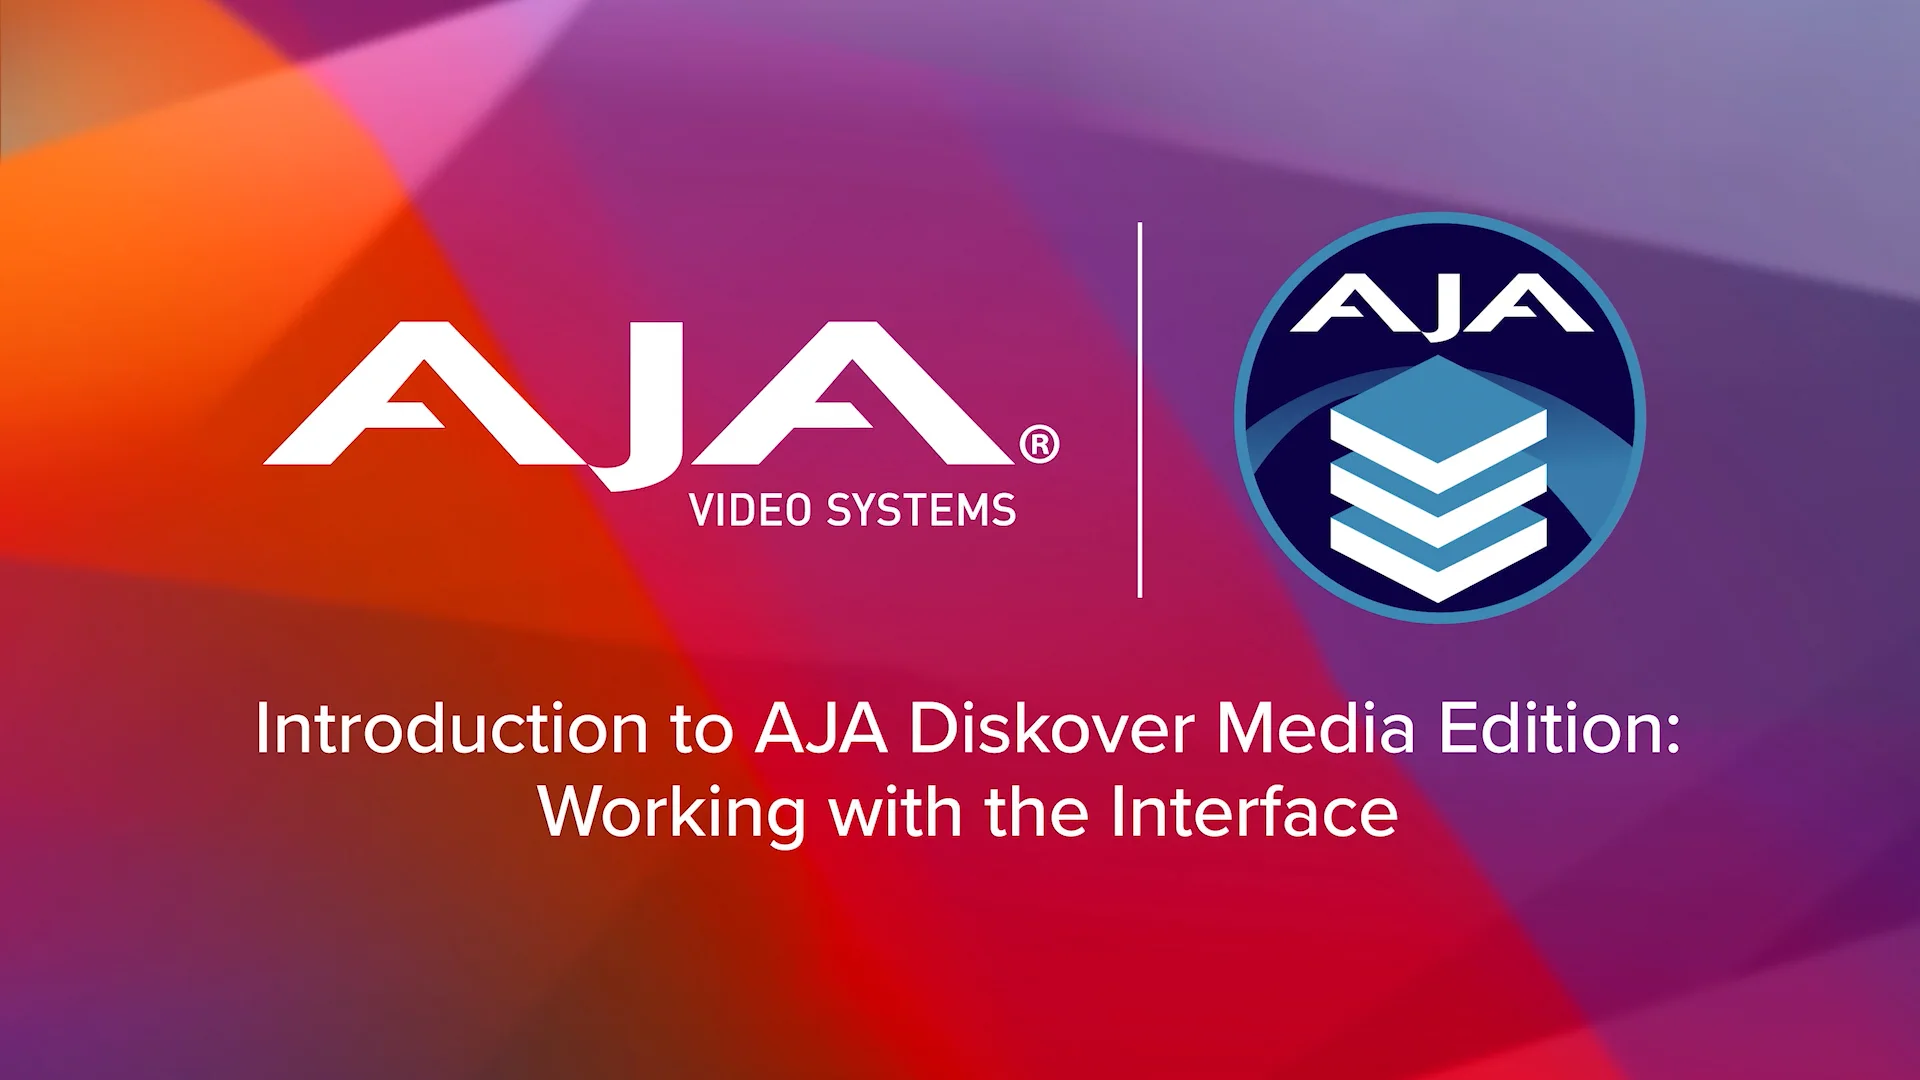 AJA Video at SMPTE TTC 2021 - HDR Productions and Conversion Techniques  with Tim Walker on Vimeo